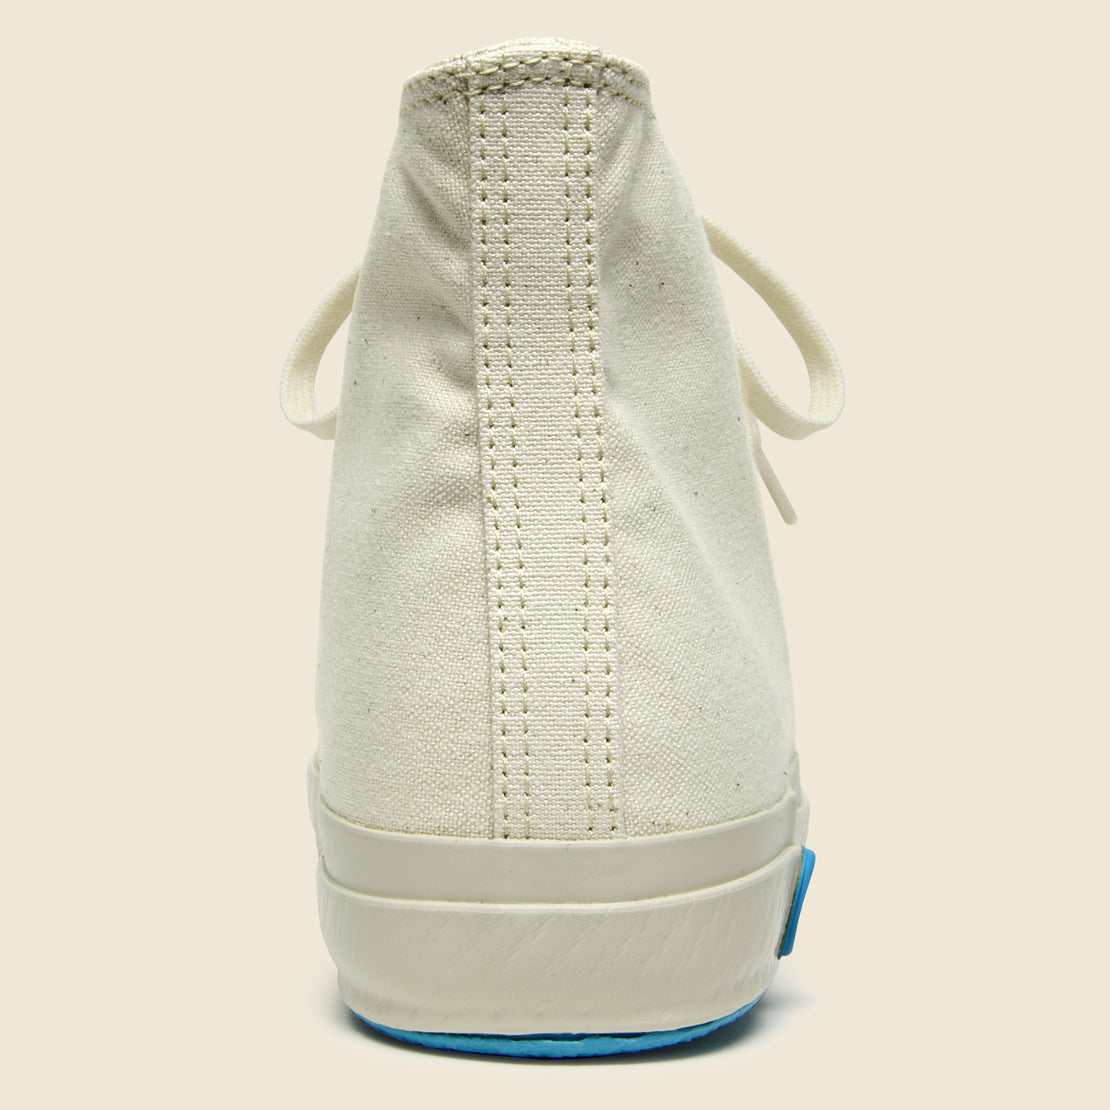 01-JP Hi Sneaker -White - Shoes Like Pottery - STAG Provisions - Shoes - Athletic